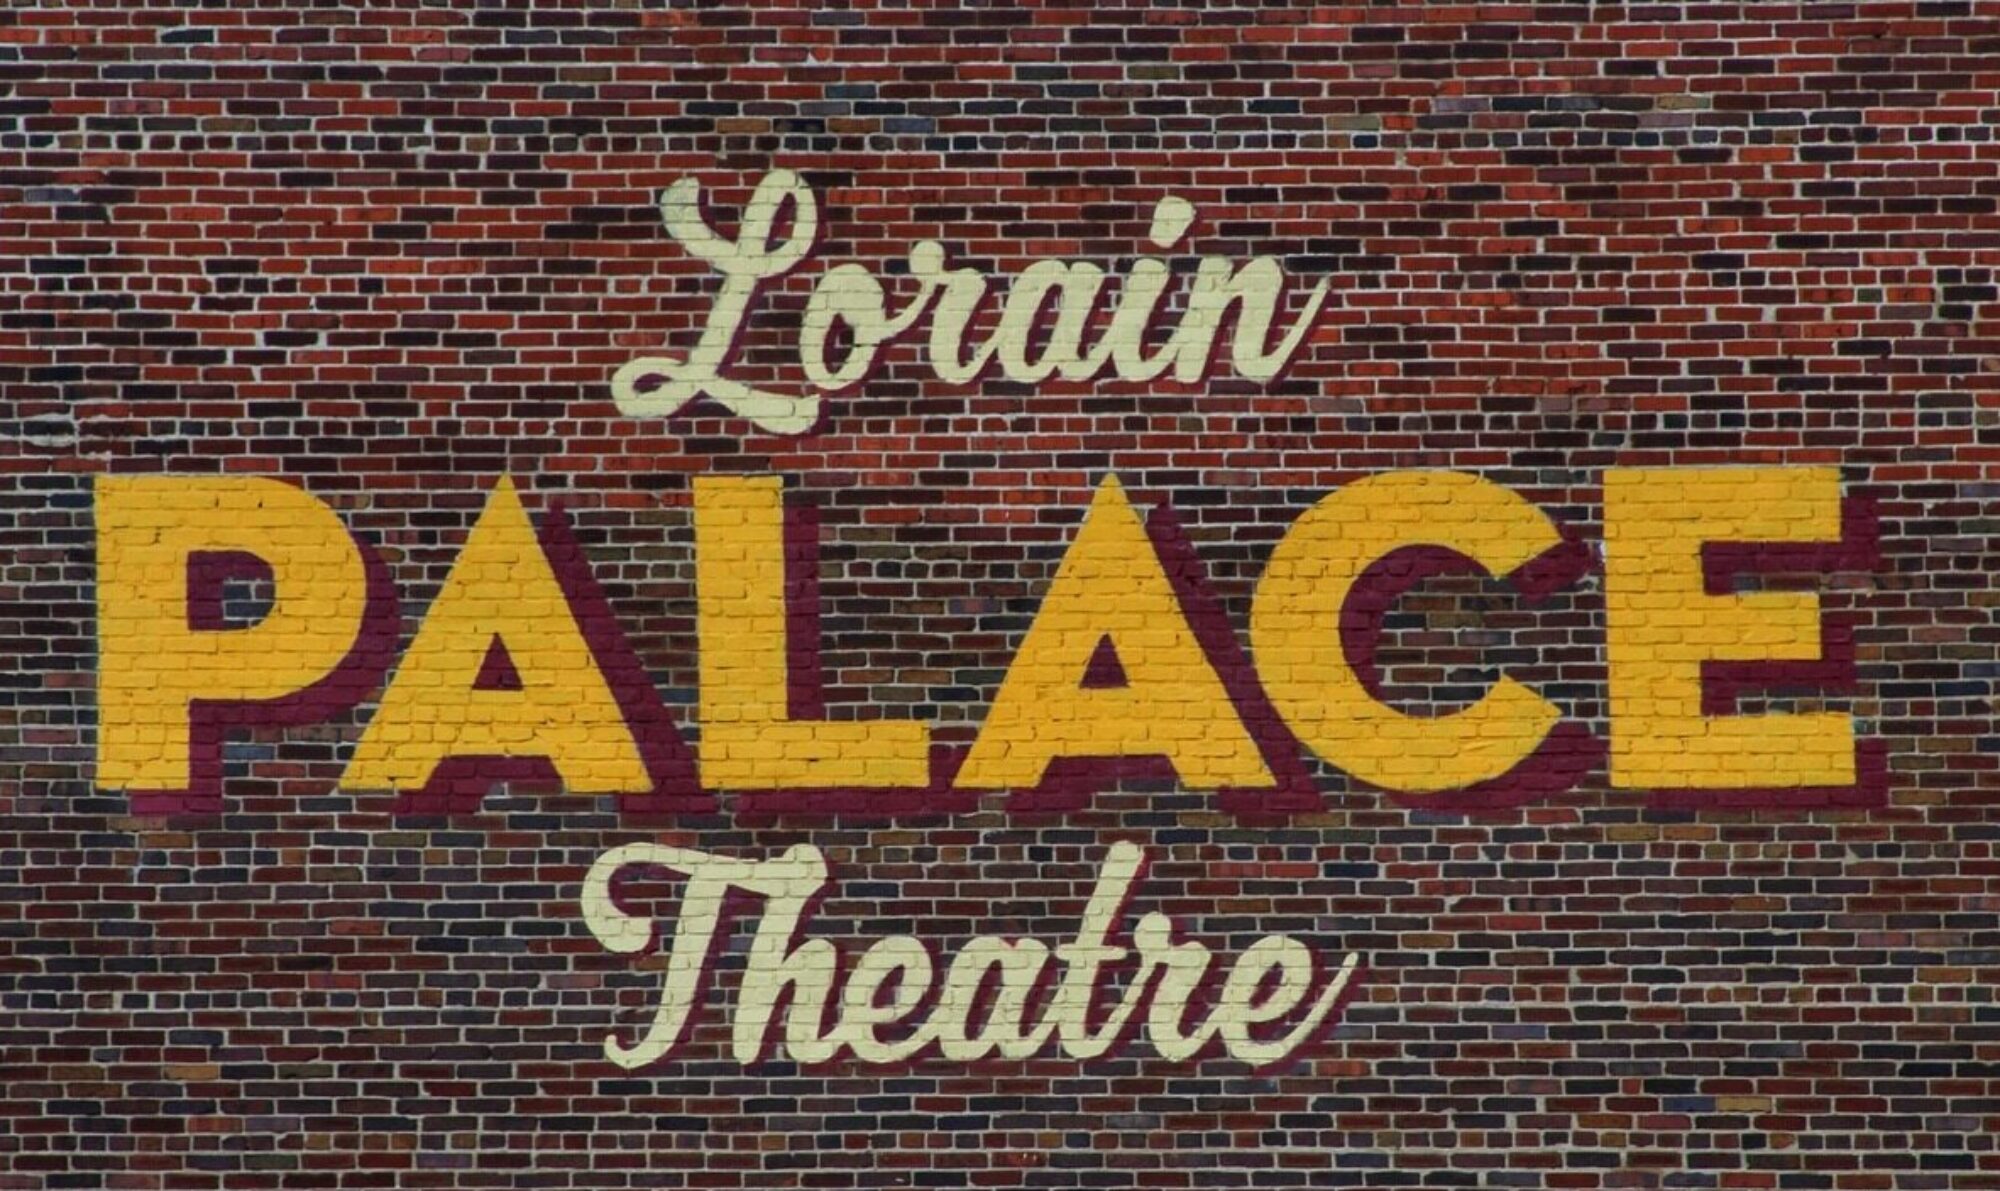 A brick wall with the words lorain palace theatre written in yellow.